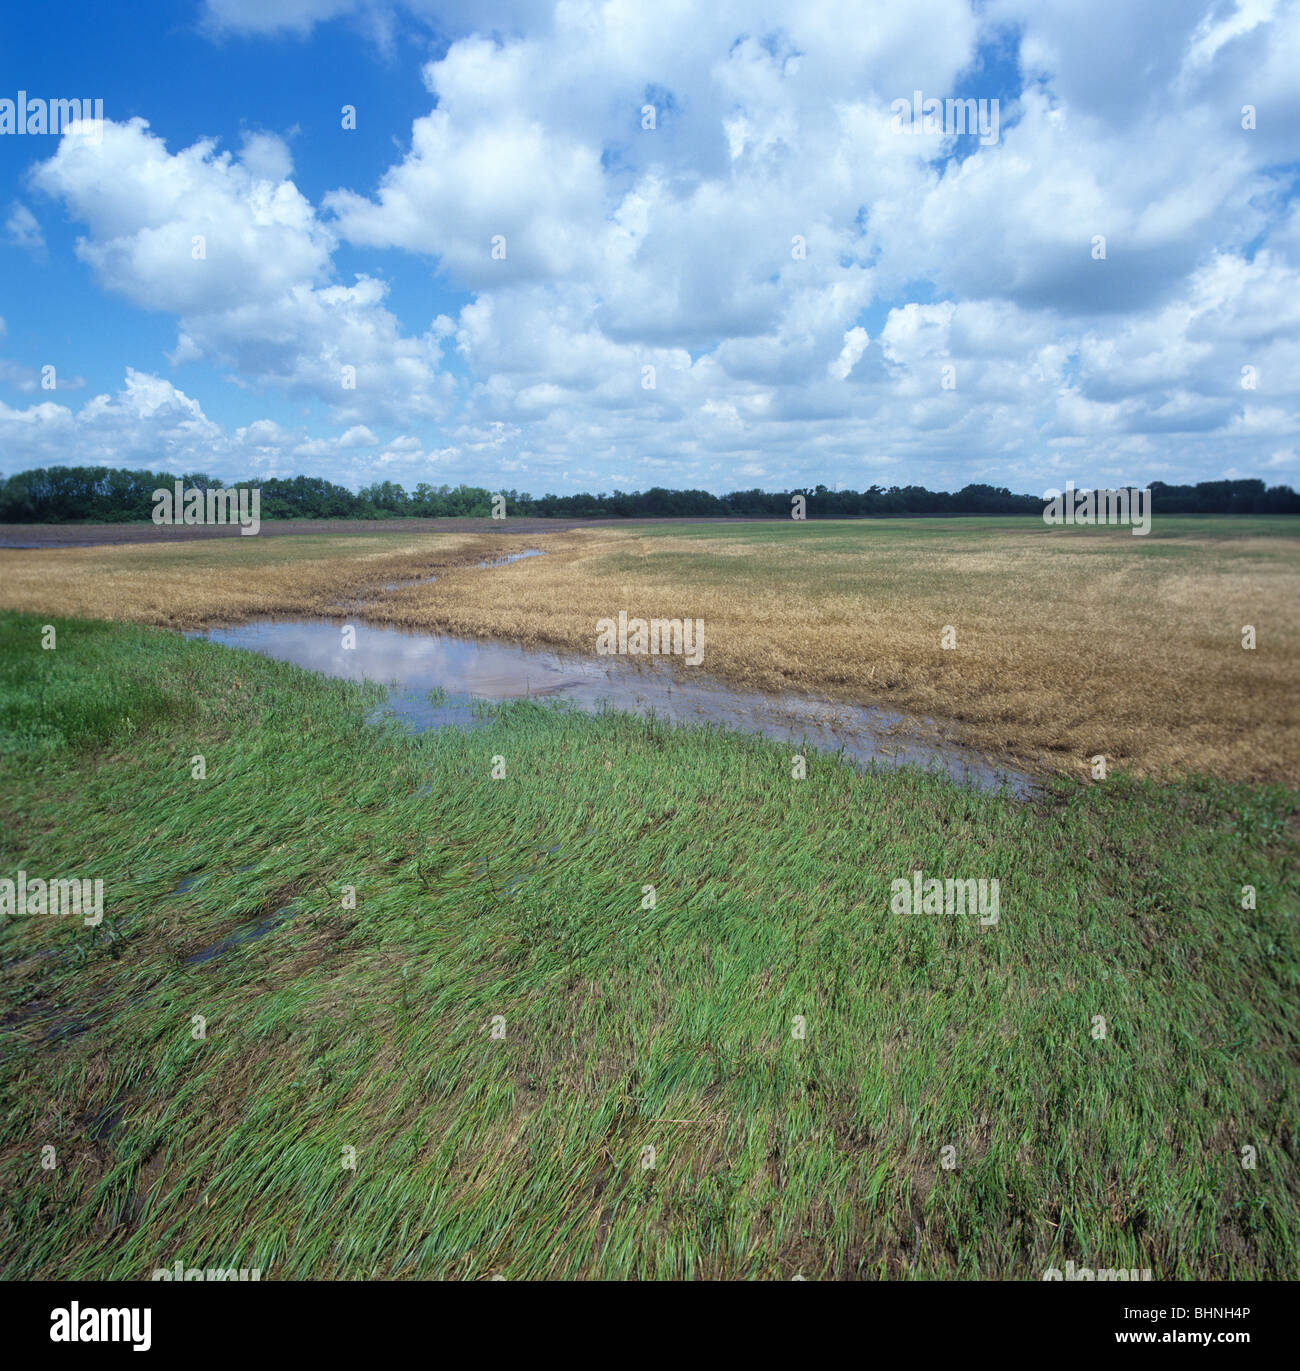 Wheat crops close to a river destroyed by floods caused by heavy rains, Kansas, USA Stock Photo